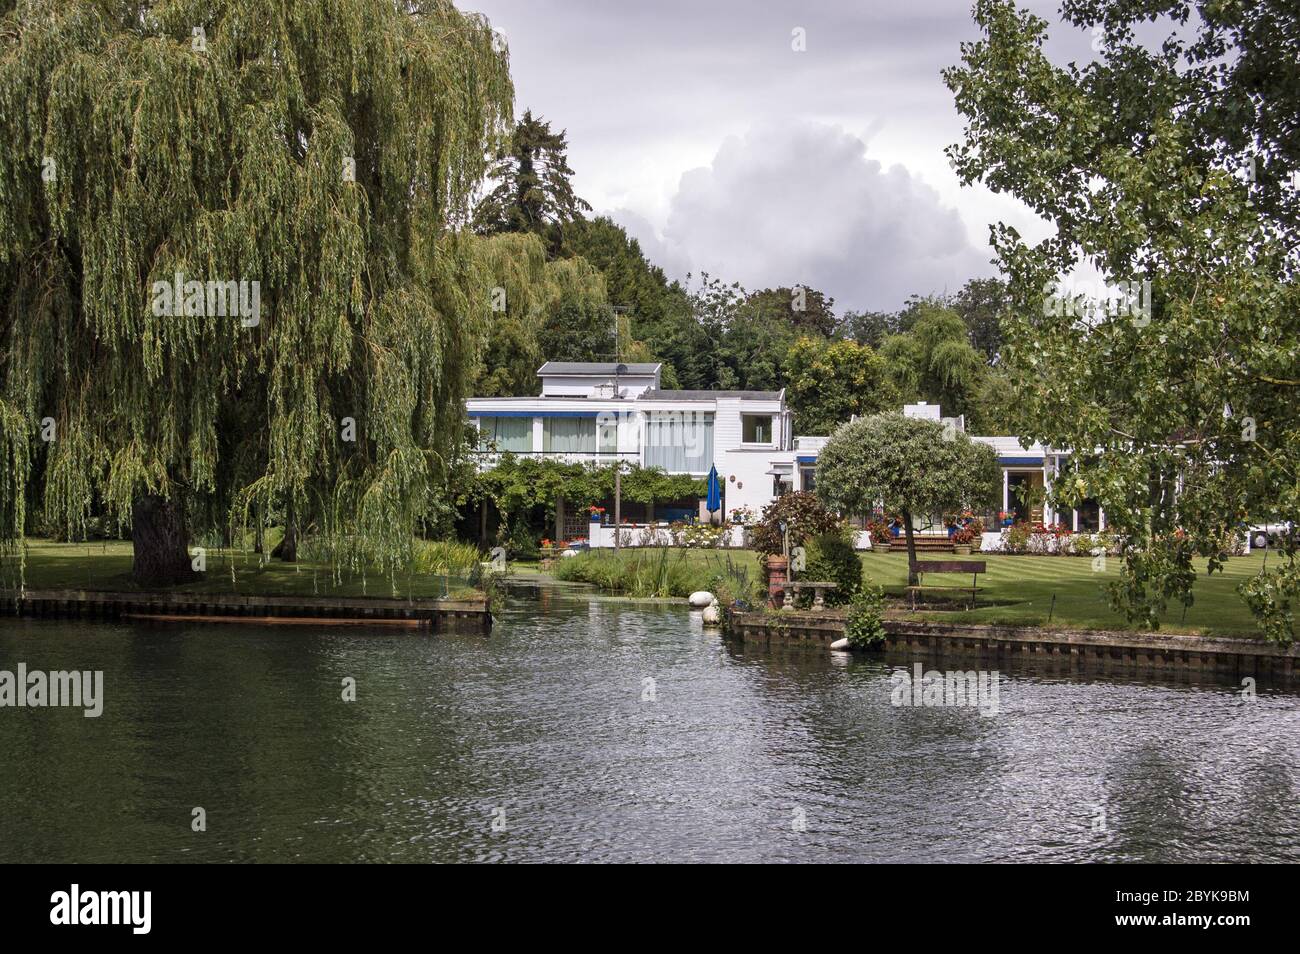 Wargrave, UK - August 7, 2011:  Celebrity home of magician Paul Daniels and wife Debbie McGee in Wargrave, Berkshire. Flood prevention measures have b Stock Photo